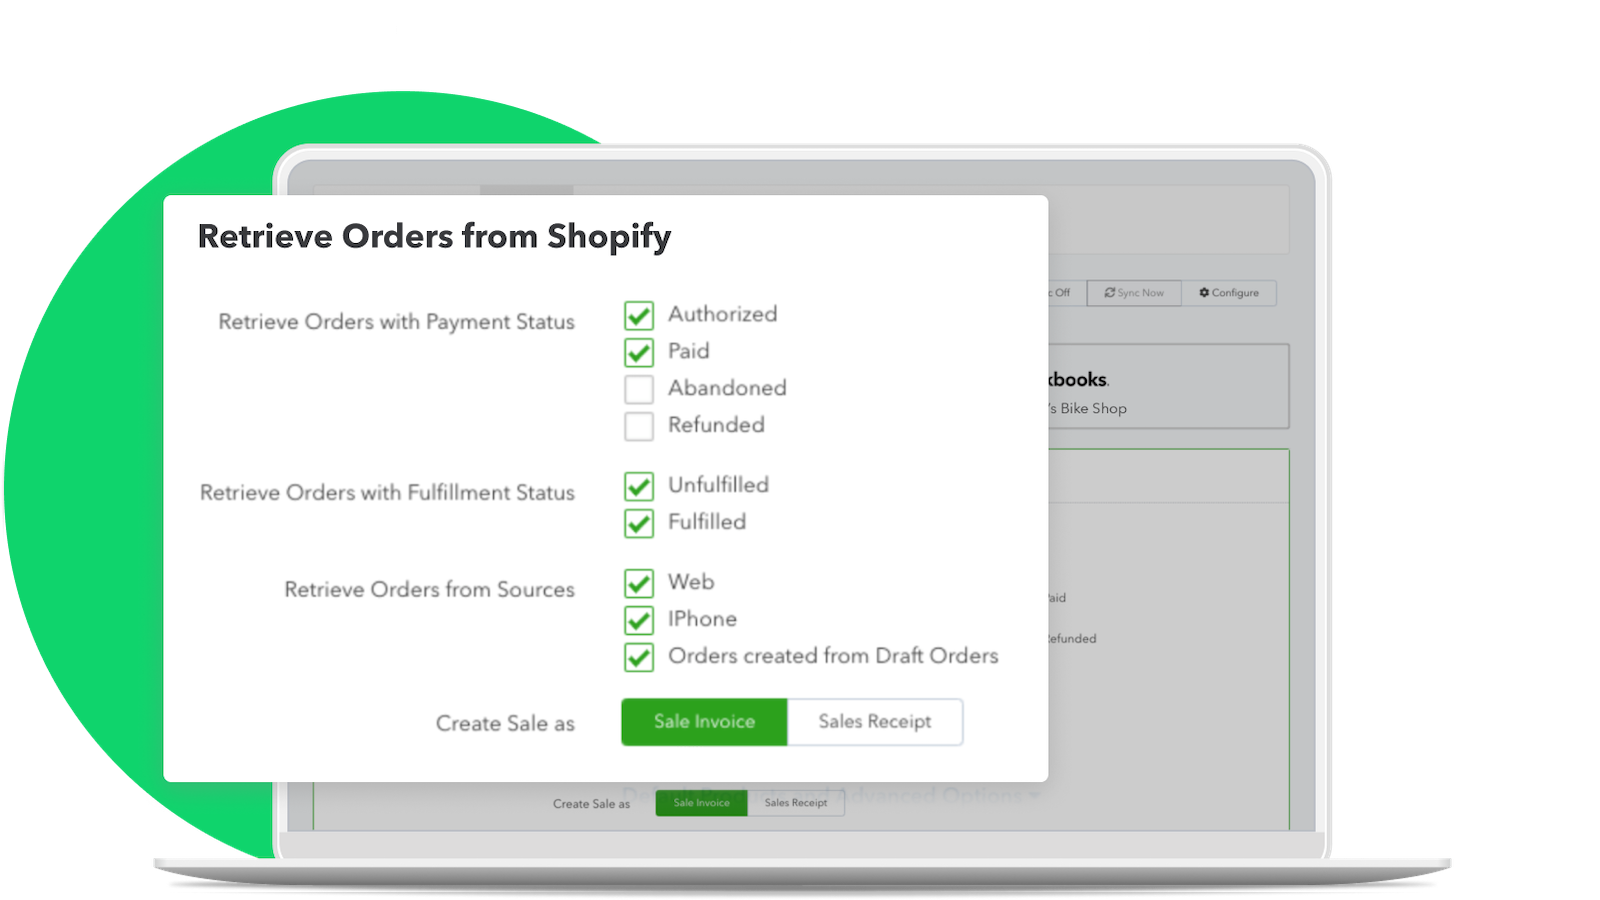 Orders from your store become invoices or receipts on QuickBooks